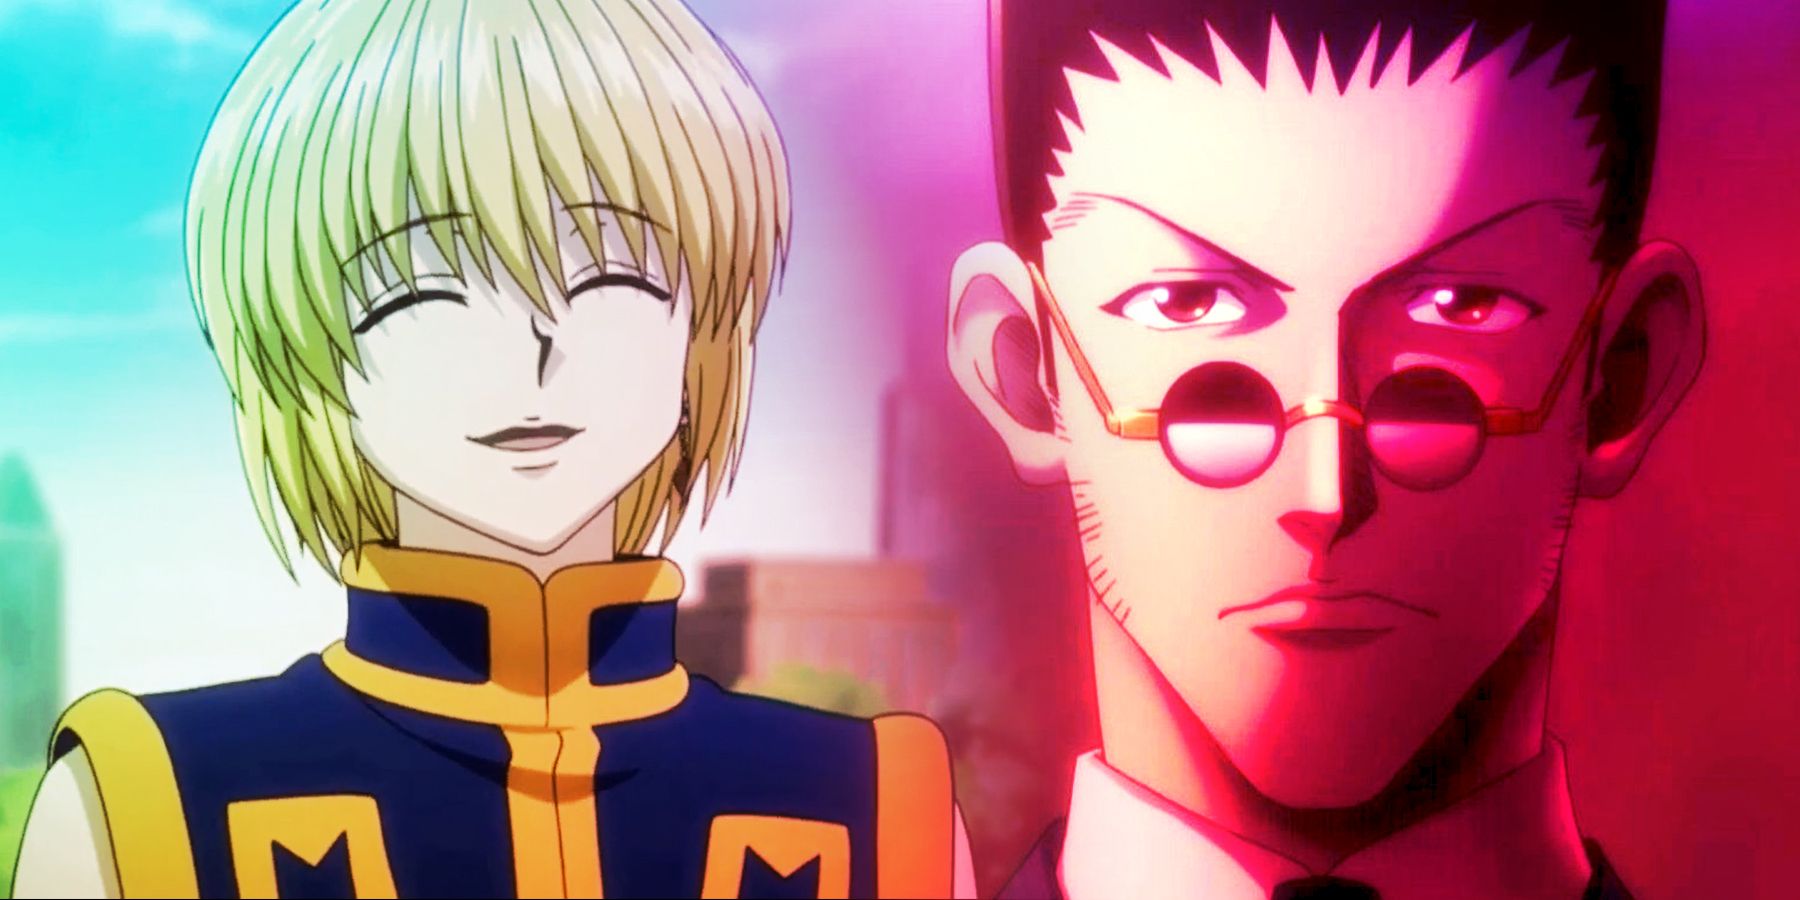 How old is Leorio from Hunter x Hunter?